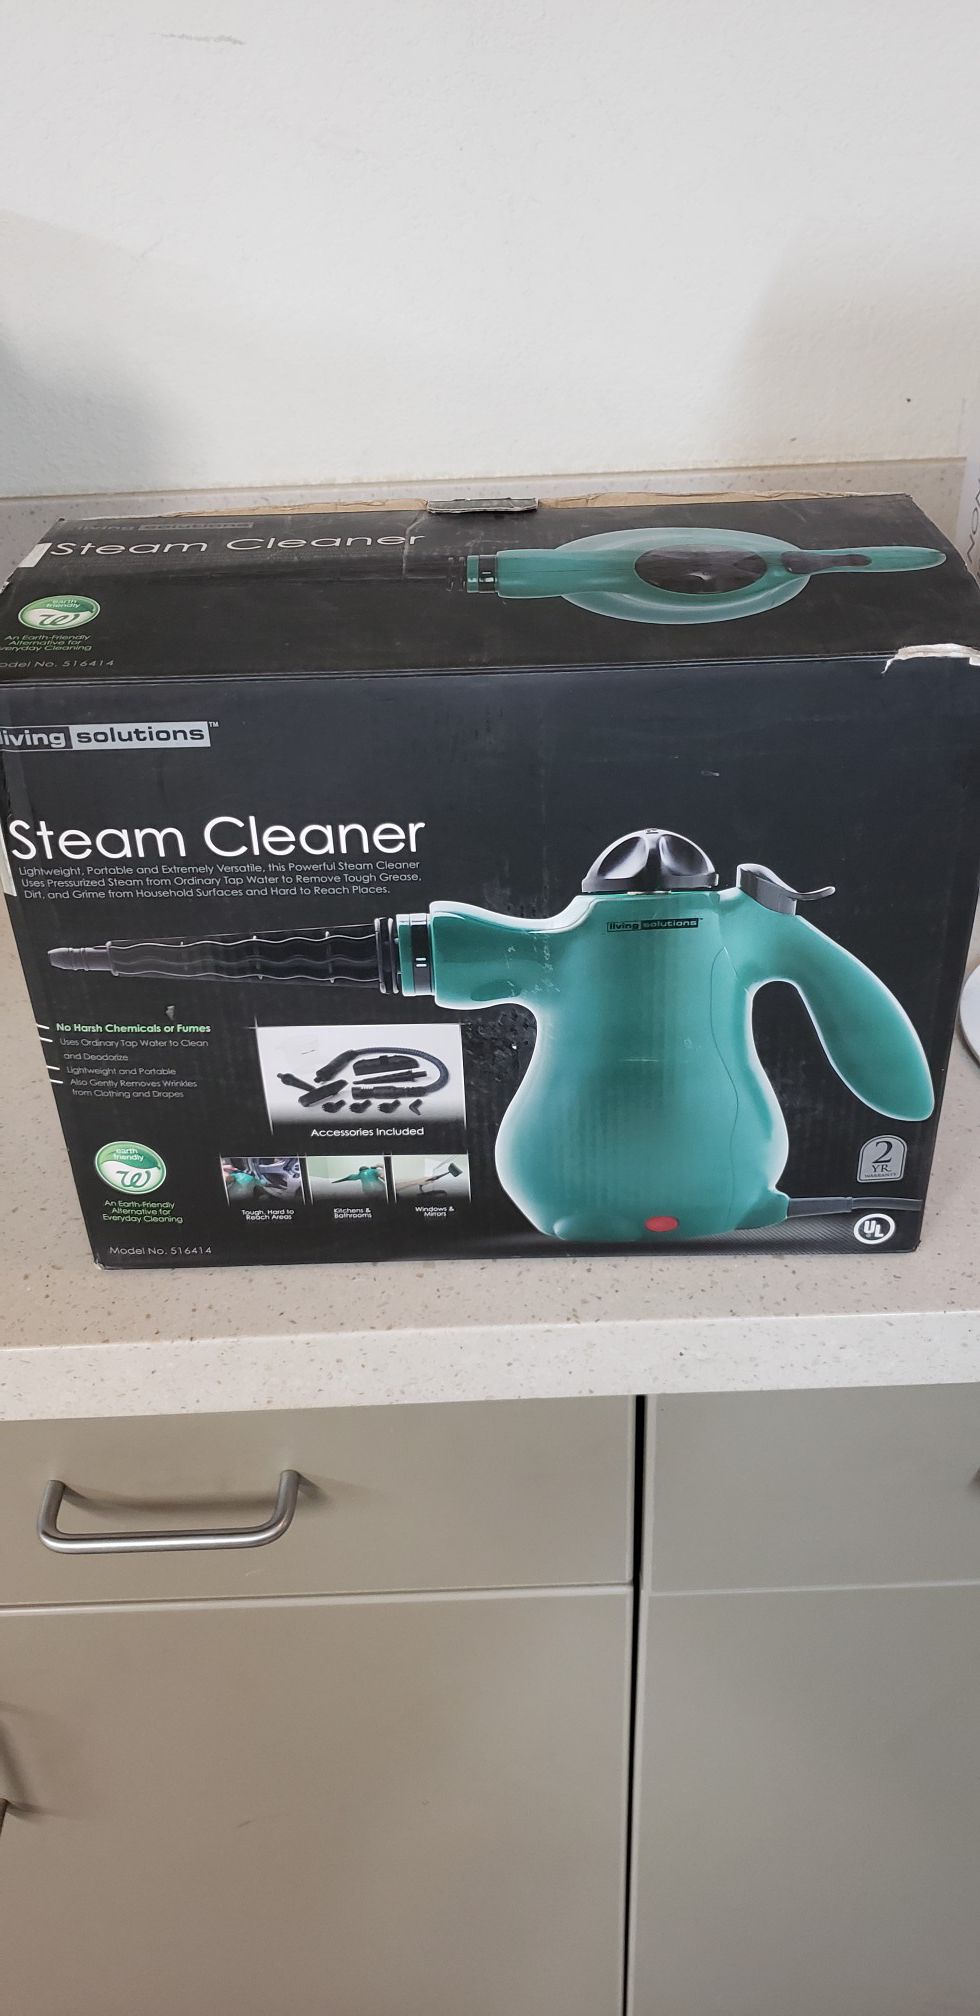 Steam cleaner, portable